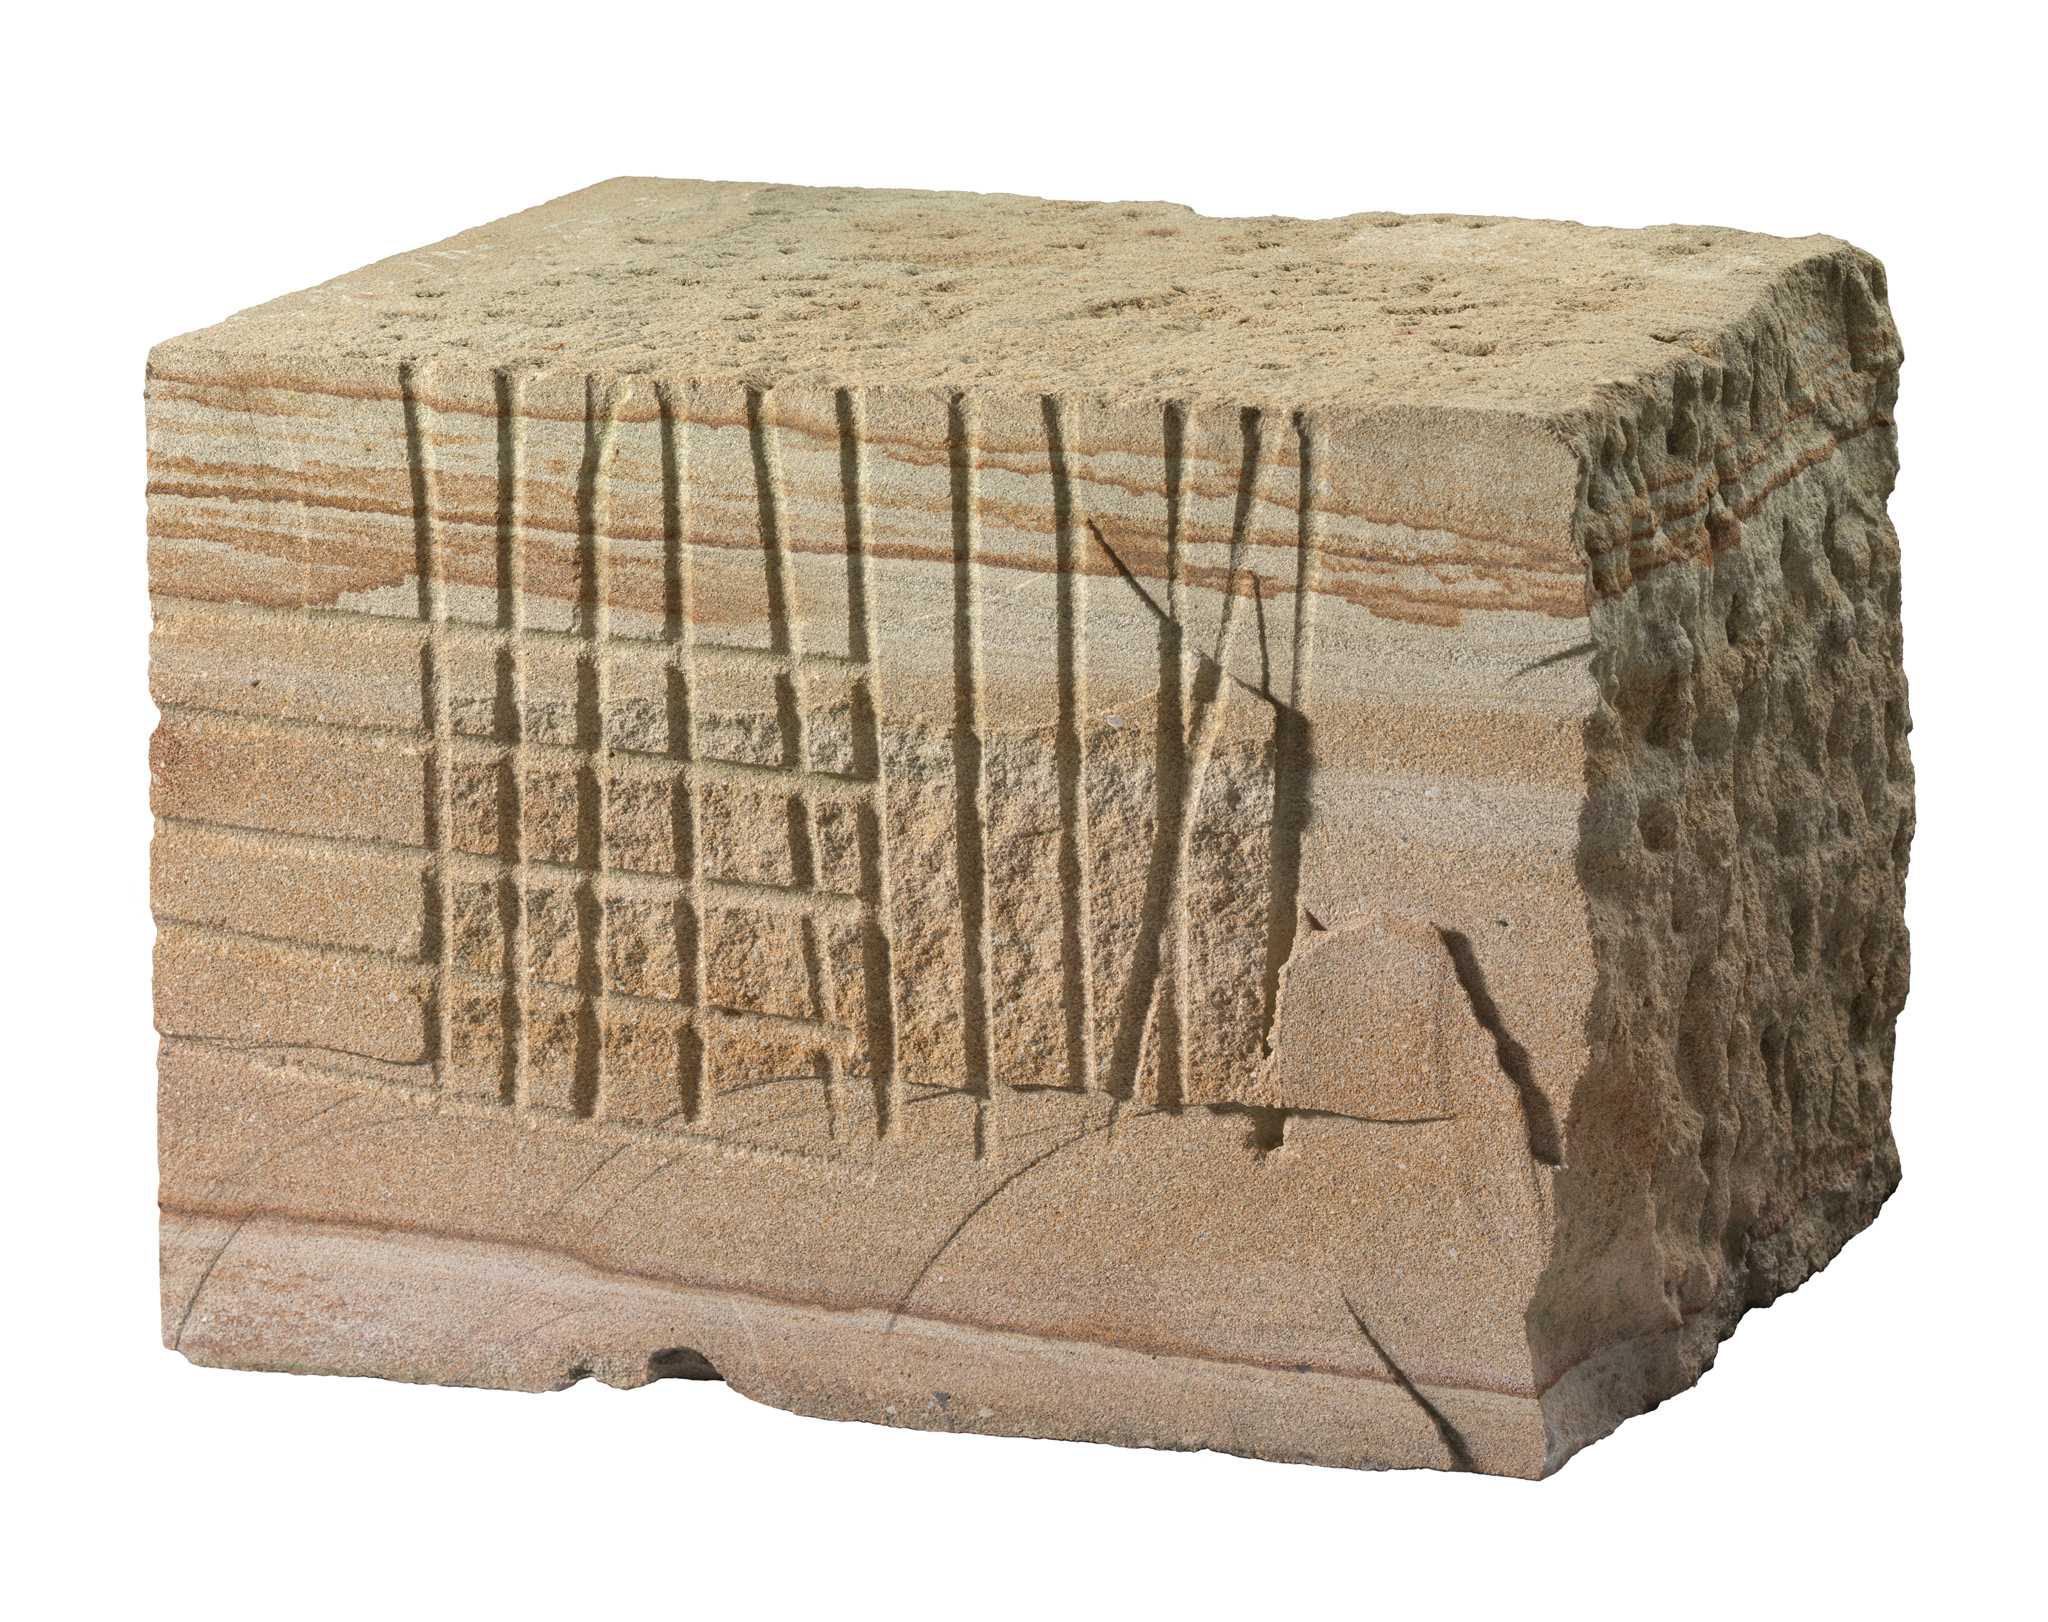 Photograph of a block of sandstone